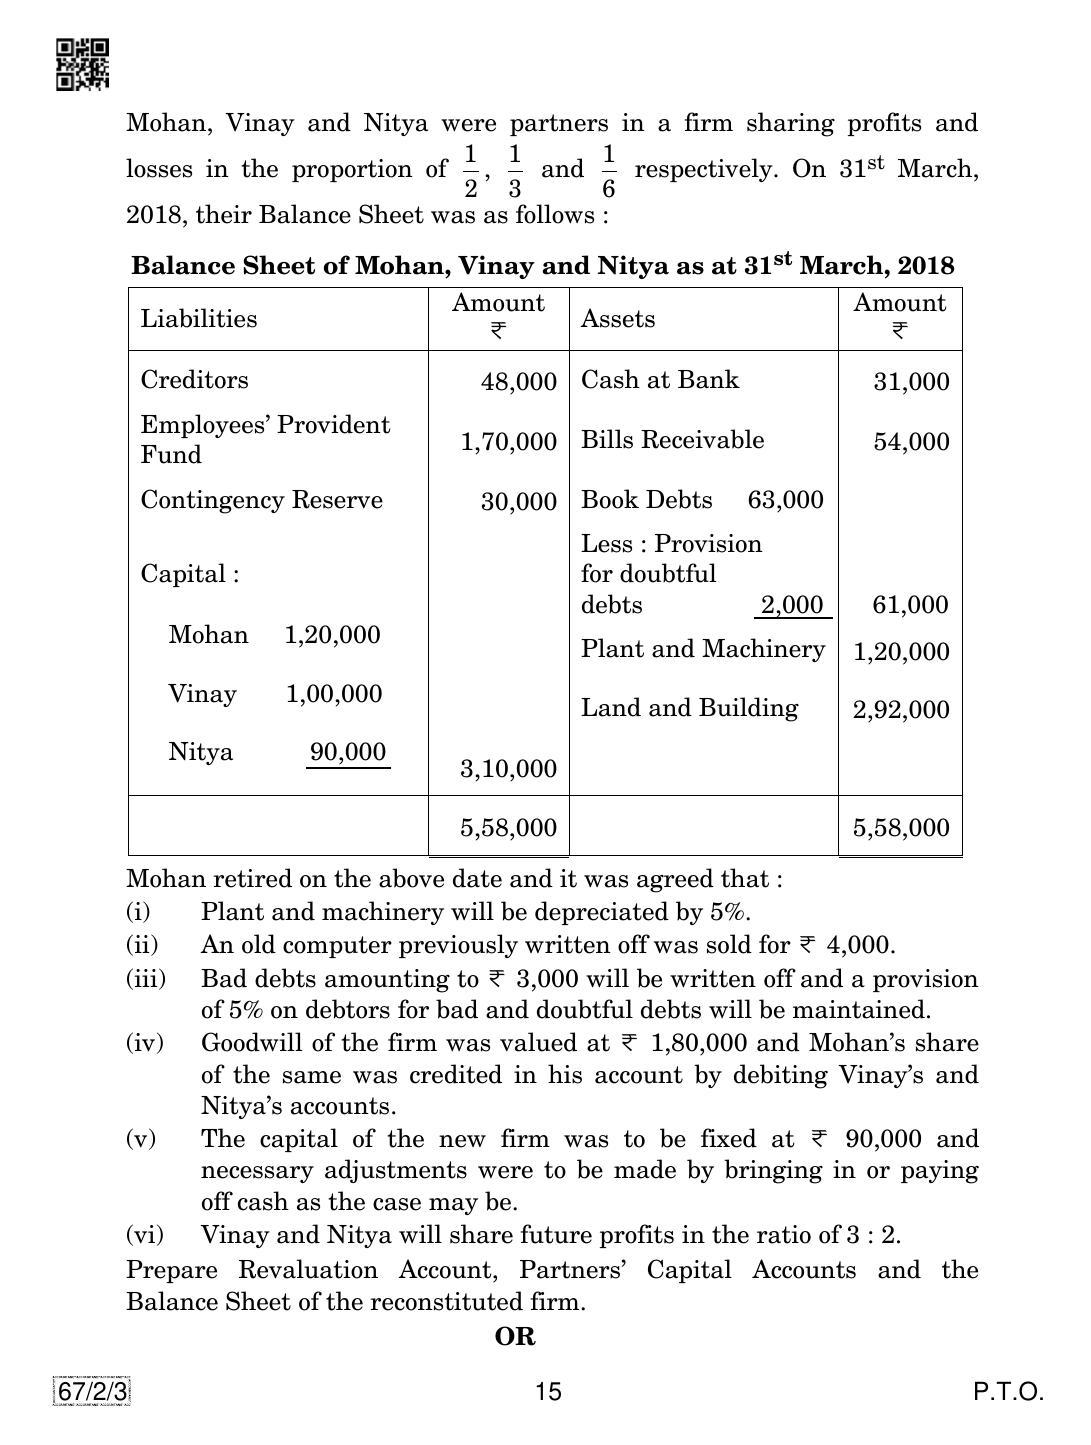 CBSE Class 12 67-2-3 Accountancy 2019 Question Paper - Page 15